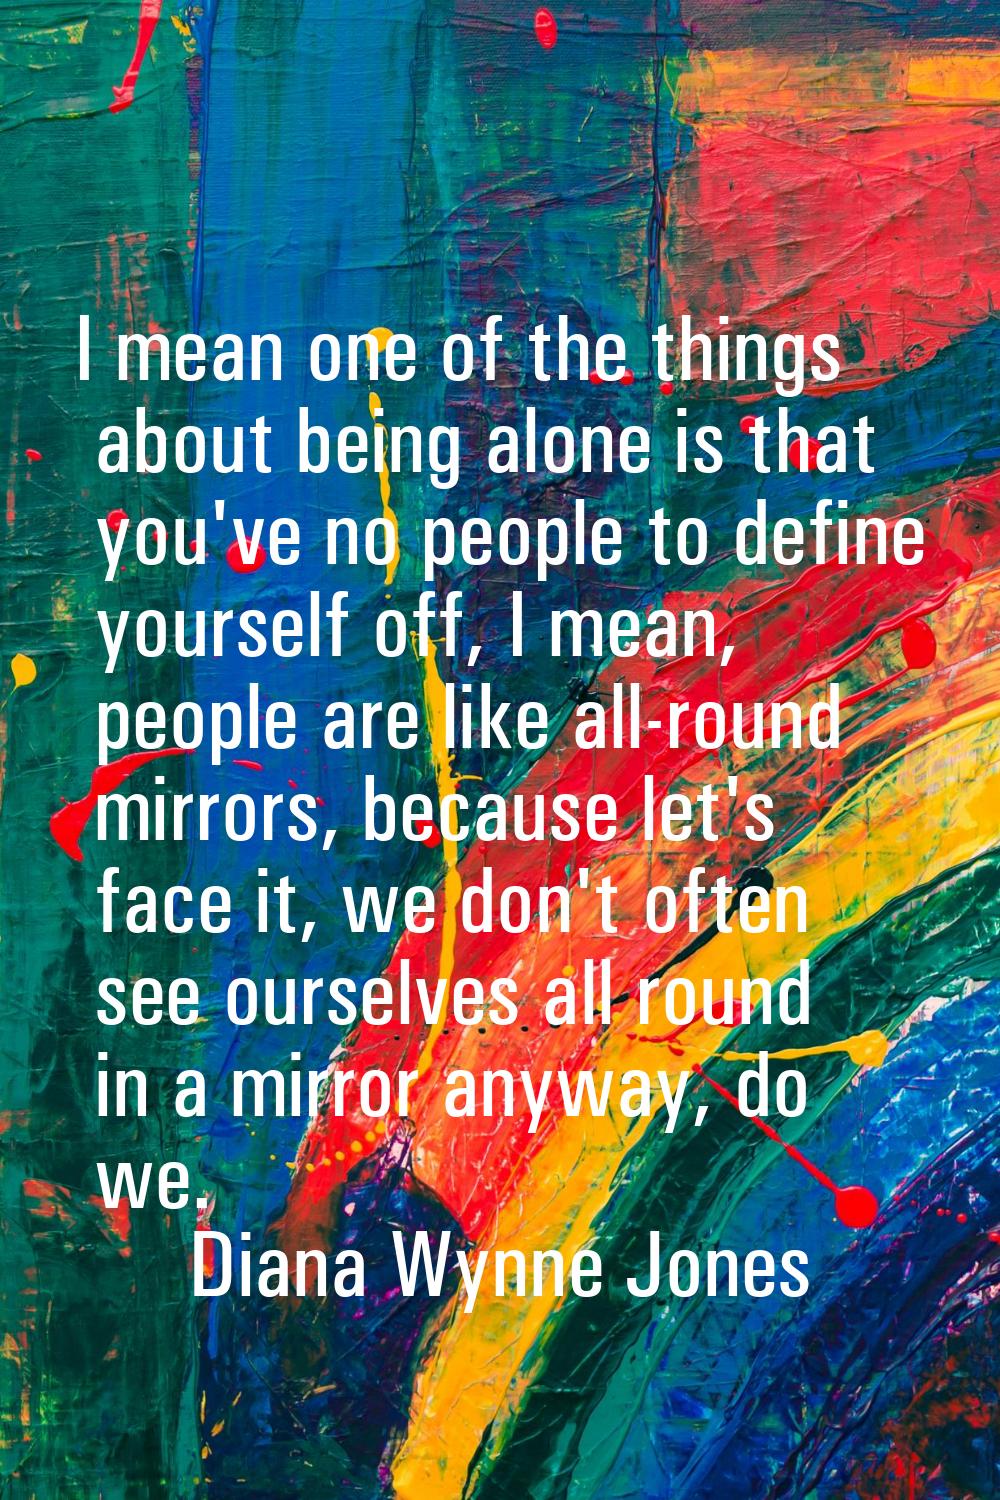 I mean one of the things about being alone is that you've no people to define yourself off, I mean,